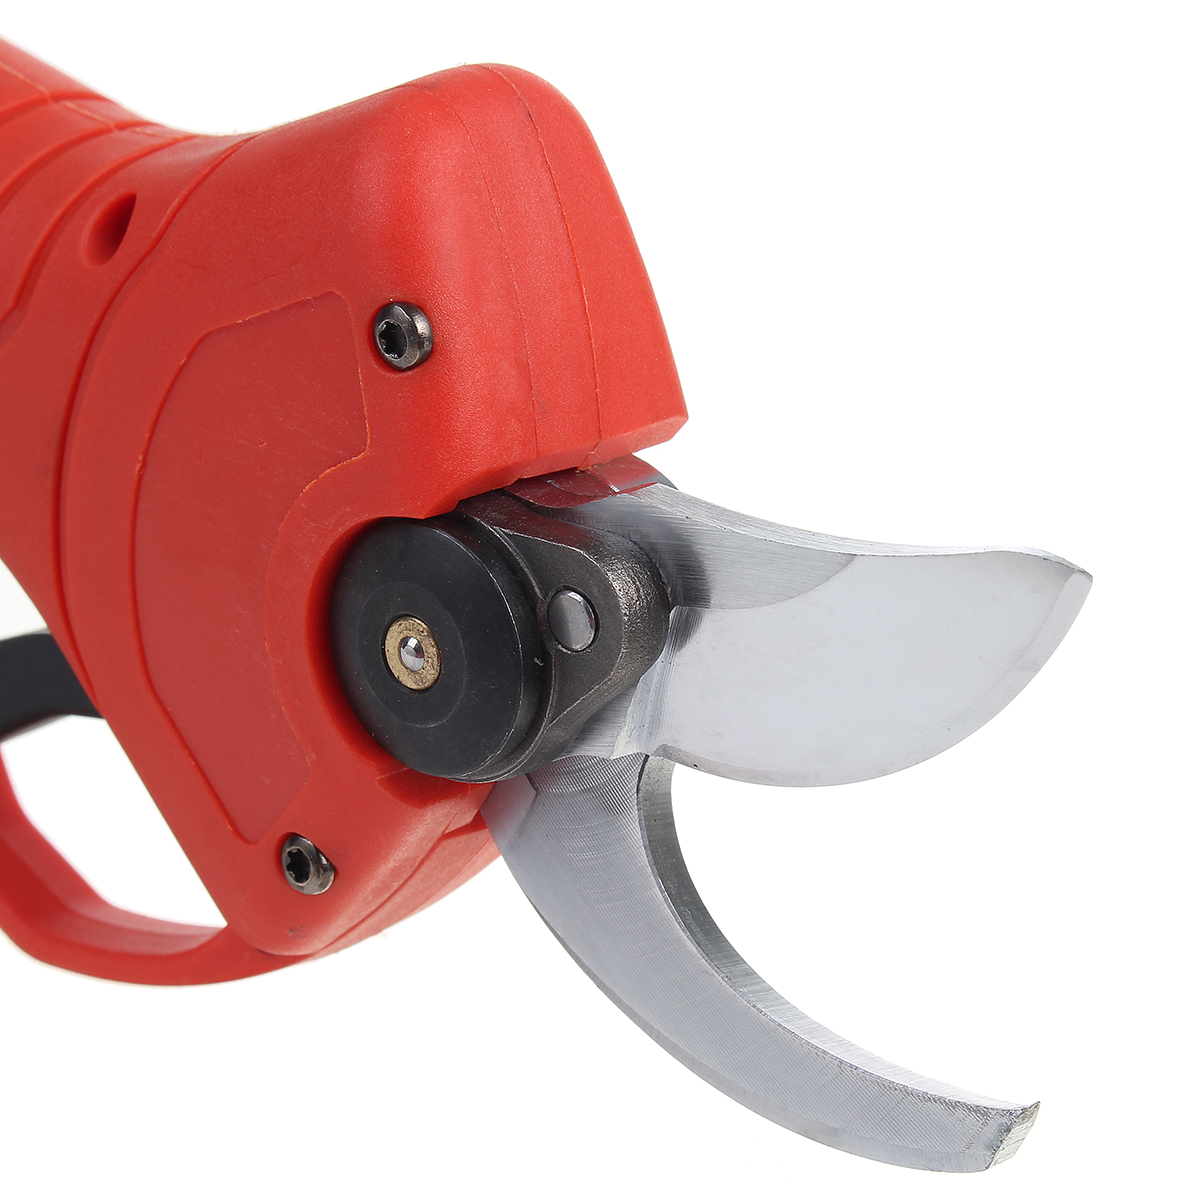 BLMIATKO-Wireless-Electric-Pruning-Shears-Scissors-Branches-Cutter-W-1-or-2pcs-Battery-Gardening-Too-1879784-10